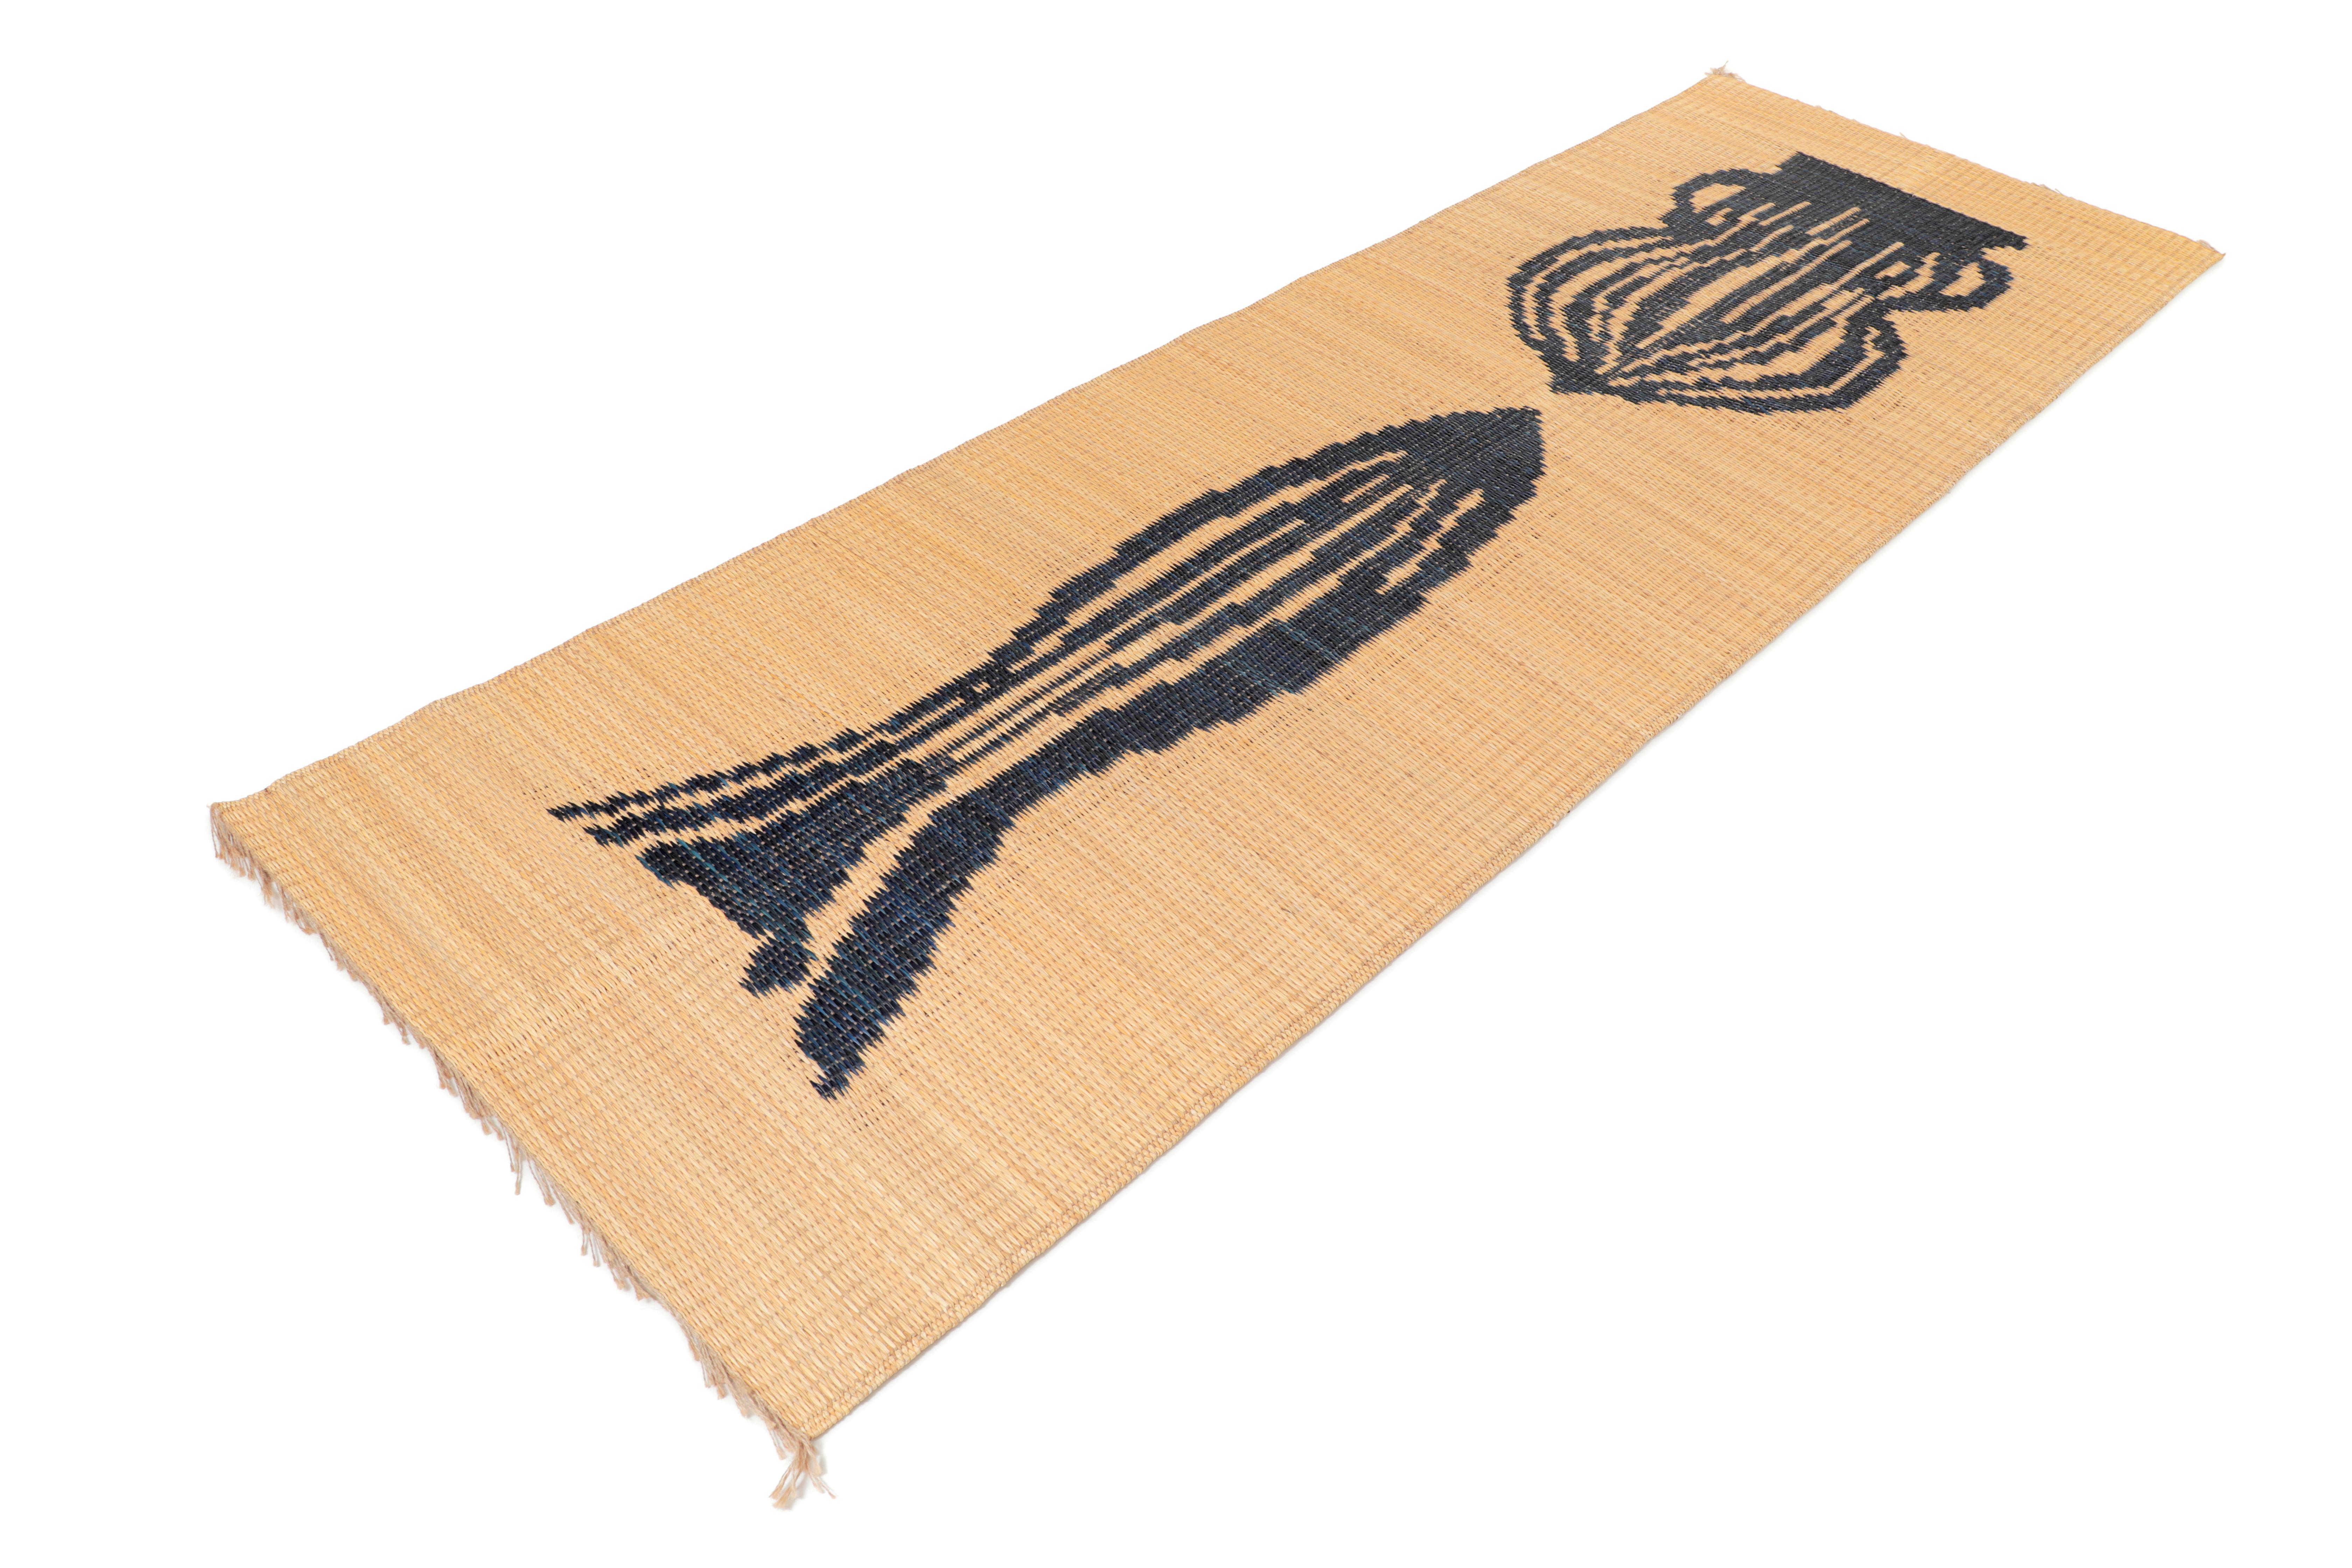 Hand-Crafted Runner Rug in Natural Fiber for Boho House For Sale